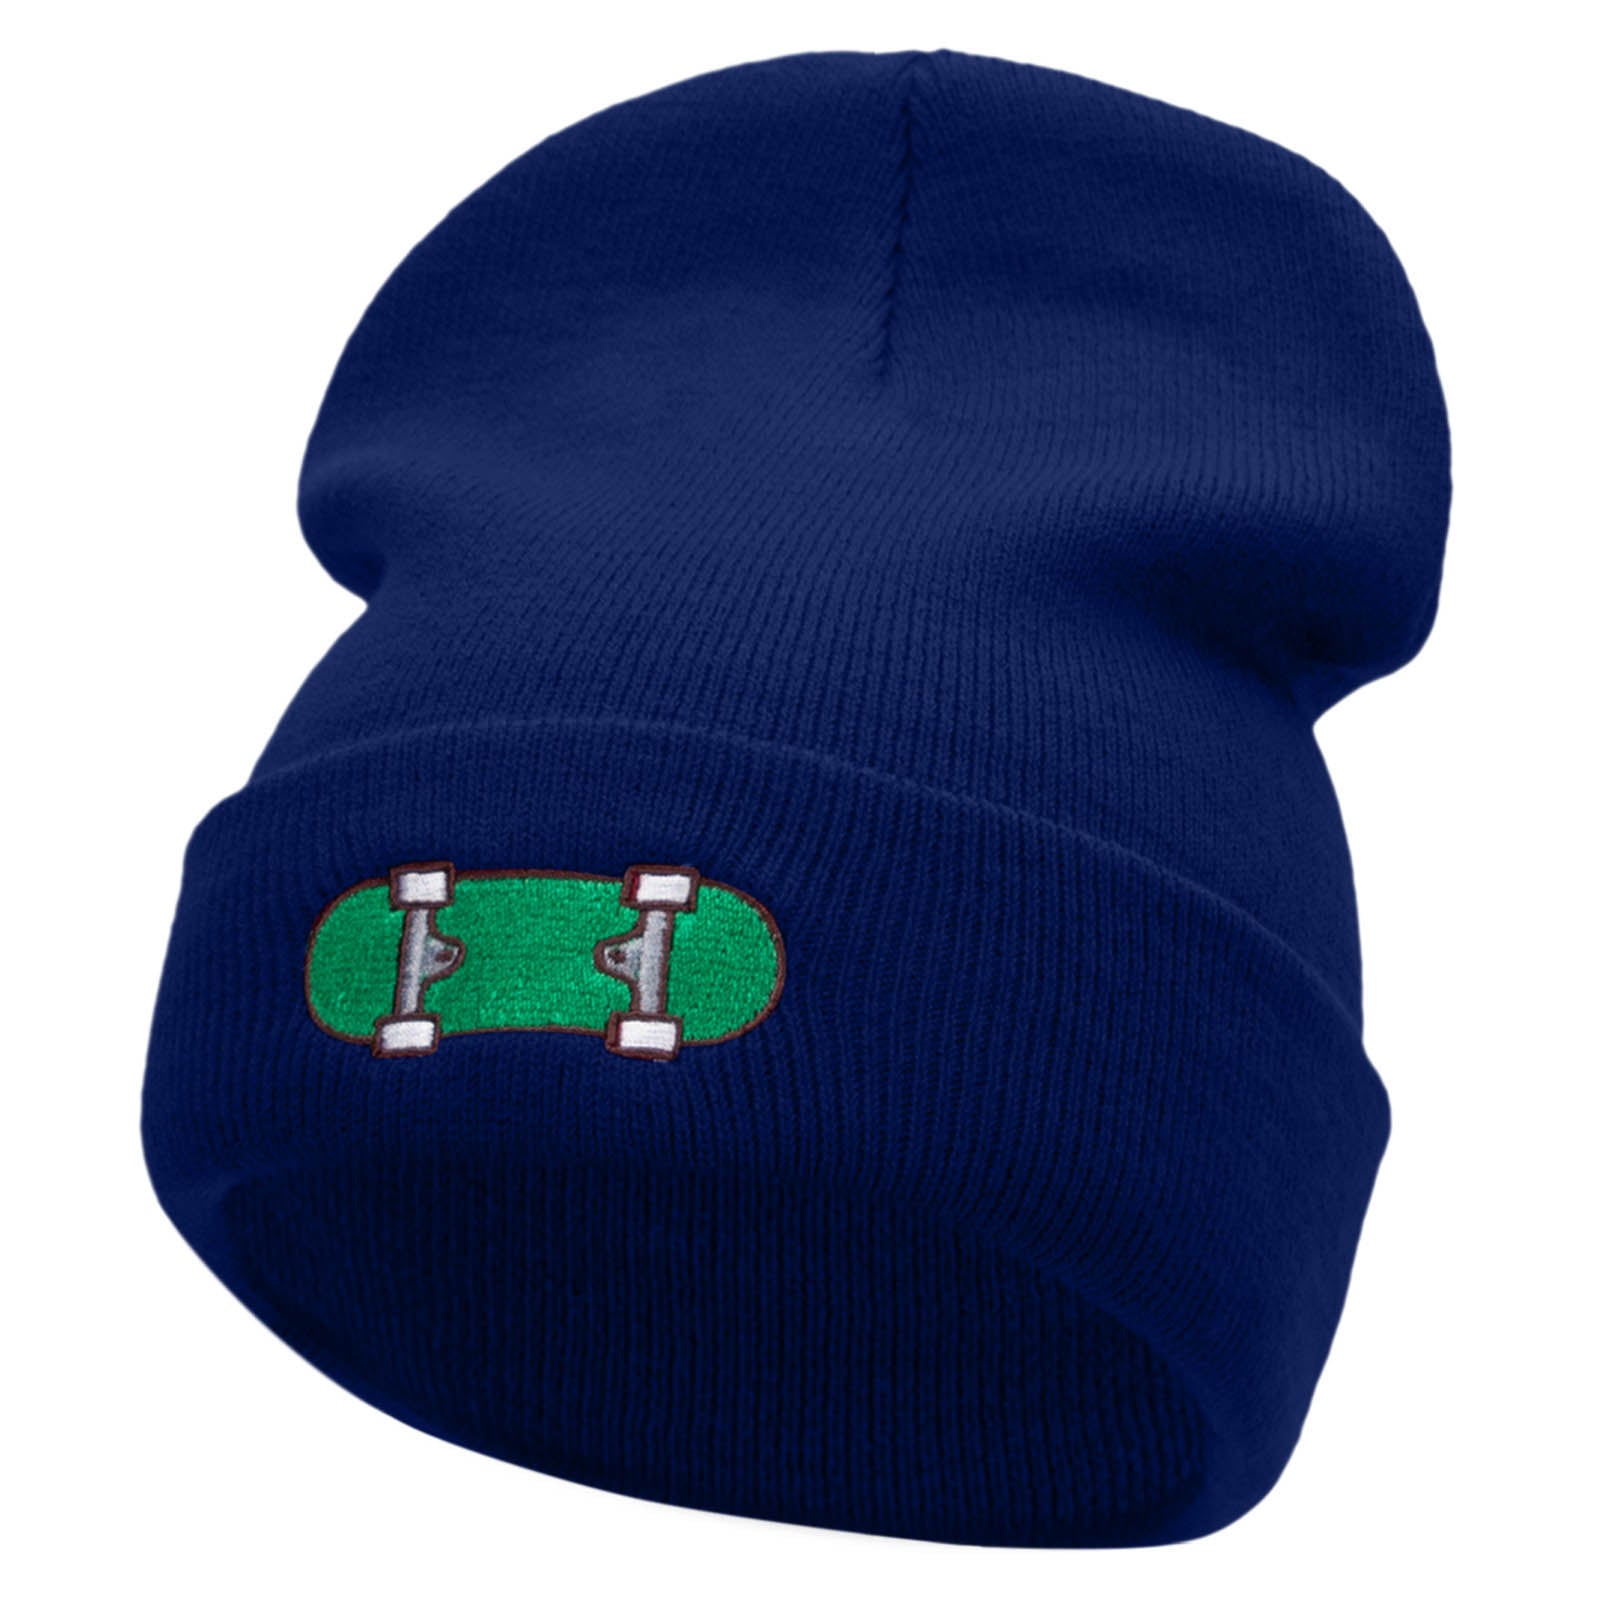 Green Skateboard Embroidered 12 Inch Long Knitted Beanie - Royal OSFM